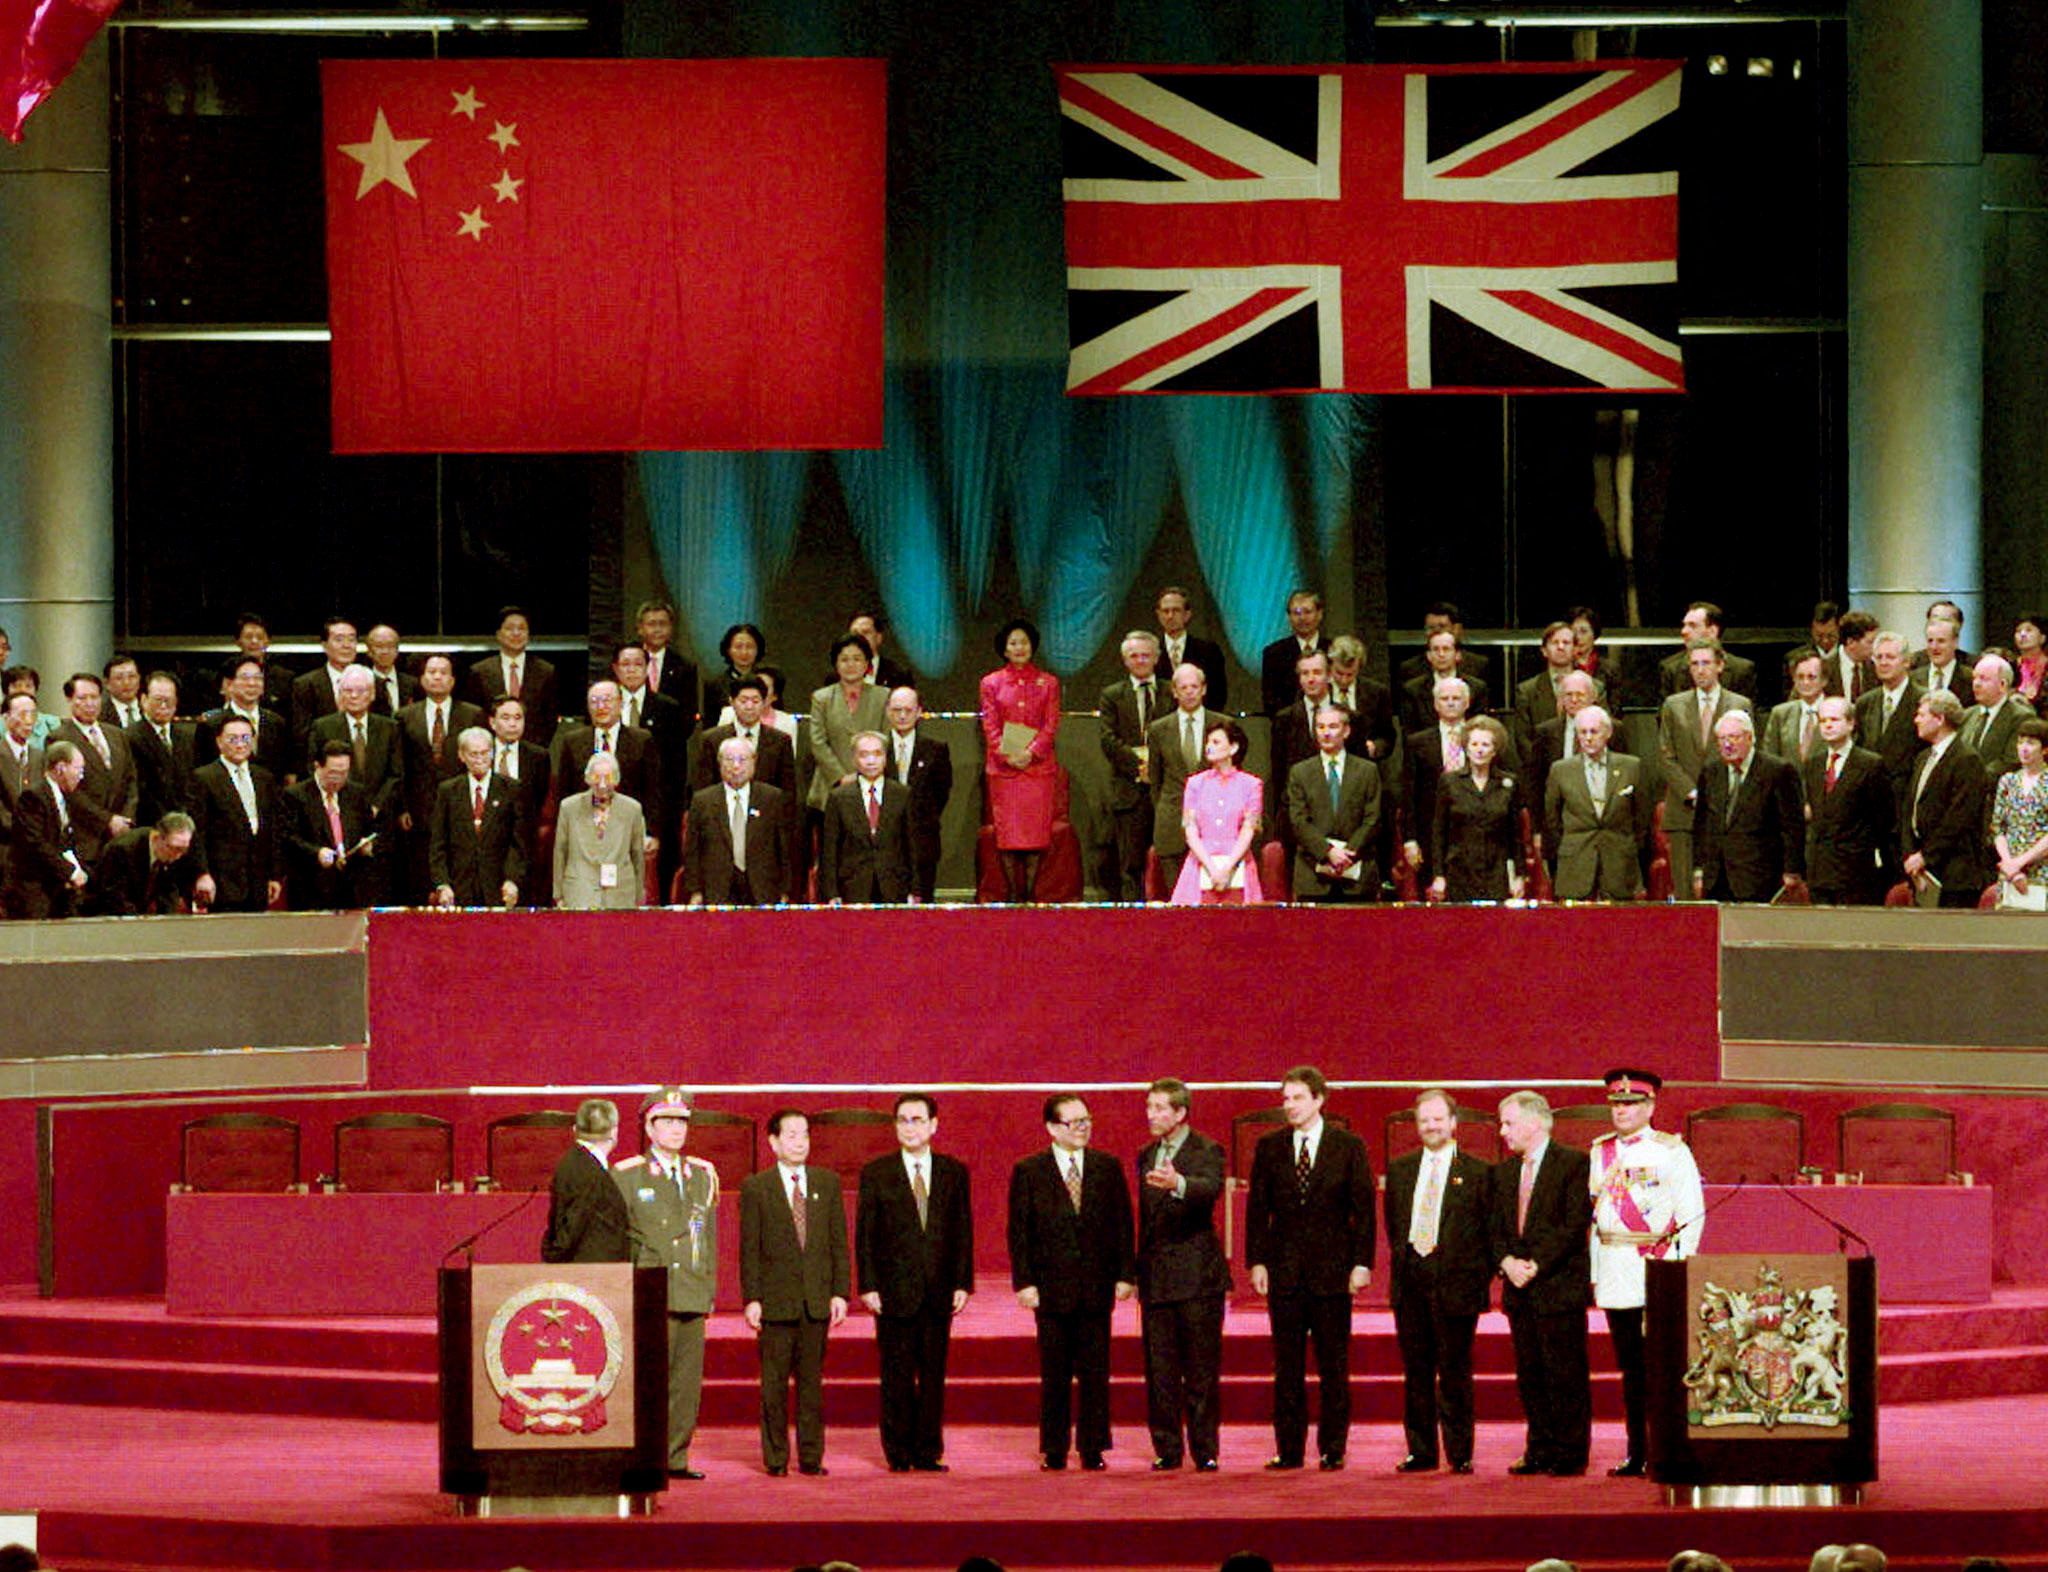 FILE PHOTO: Leaders of China and the United Kingdom stand during the raising of the Chinese flag at the ceremony of transferring sovereignty from Hong Kong to China after 156 years of British rule, on July 1, 1997 (REUTERS/Jason Red)